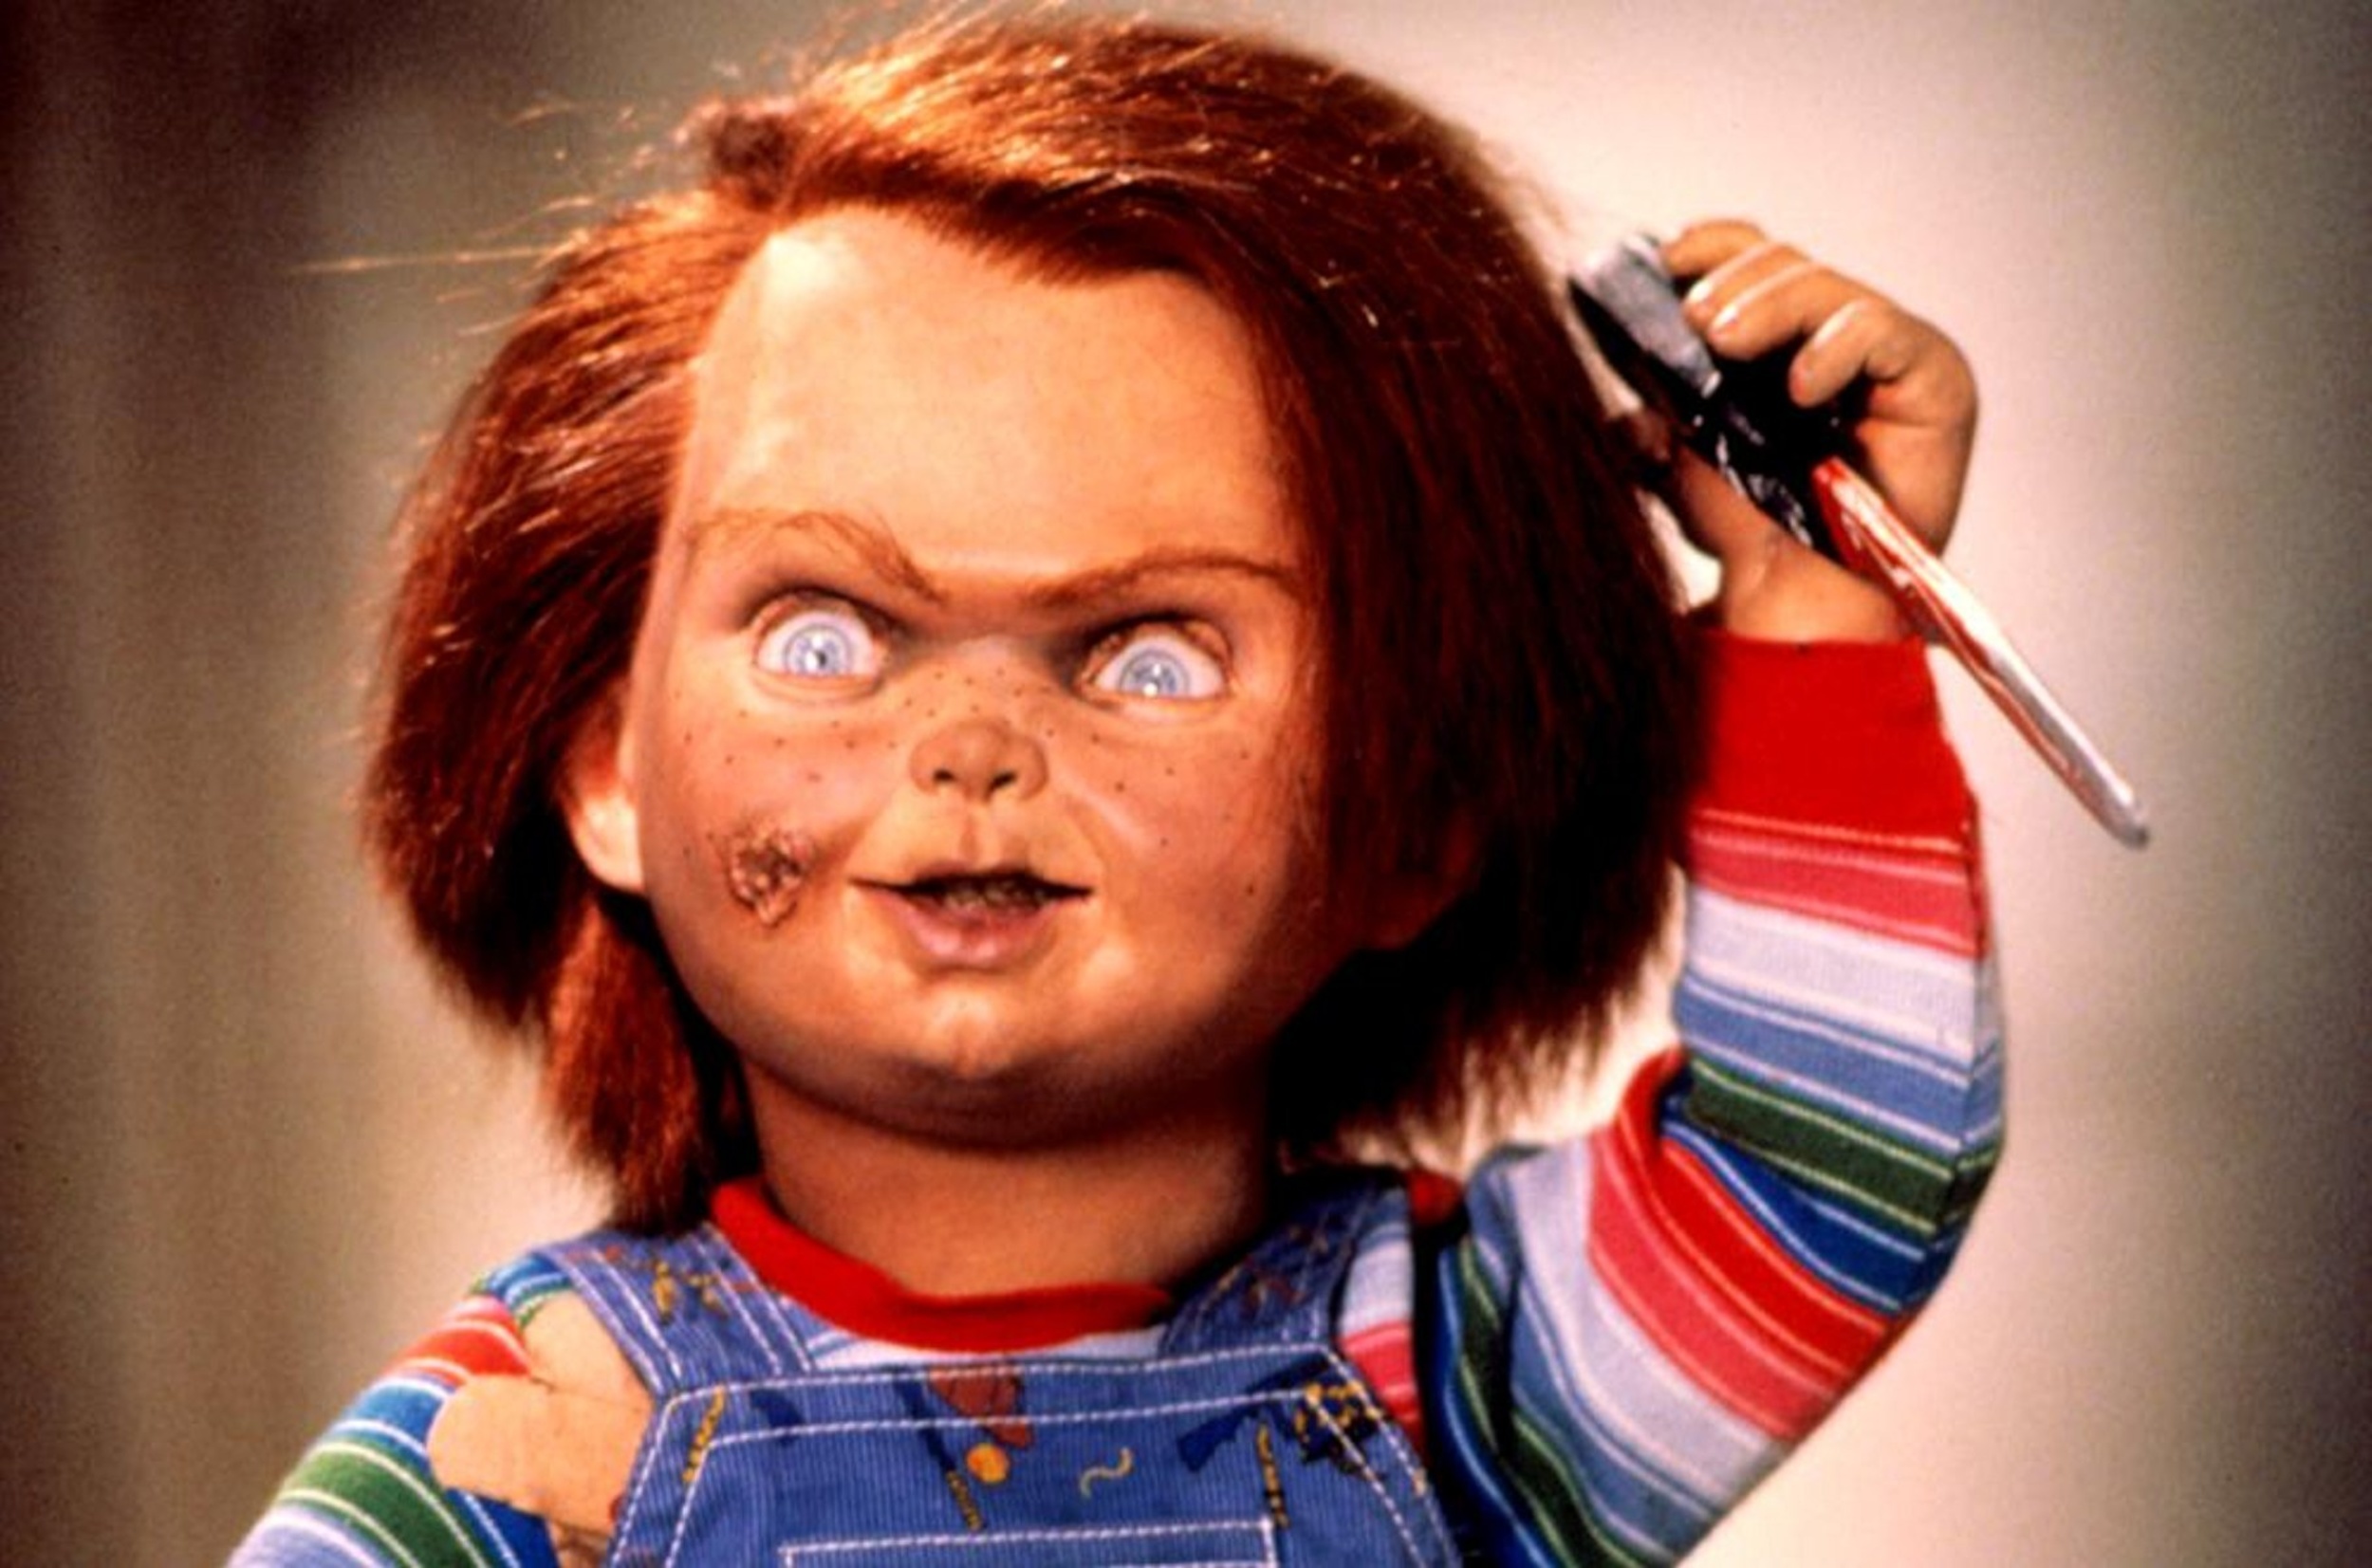 <p>The brainchild of screenwriter Don Mancini, “Child’s Play” has spawned seven movies, all of which are watchable on some level. The first film, directed by Tom Holland (“Fright Night”), got the sequel ball rolling by presenting a Cabbage Patch Doll-sized creature as a plausibly lethal murderer. The next two sequels coasted on the effectiveness of the first, while “Bride of Chucky” and “Seed of Chucky” veered enjoyably into camp. Universal and Mancini successfully revived the franchise in 2013 as a direct-to-video series, but MGM has seemingly kiboshed further Mancini efforts thanks to its 2019 remake.</p><p>You may also like: <a href='https://www.yardbarker.com/entertainment/articles/what_star_shows_that_survived_major_cast_changes_and_kept_going_010224/s1__27658484'>What star? Shows that survived major cast changes and kept going</a></p>